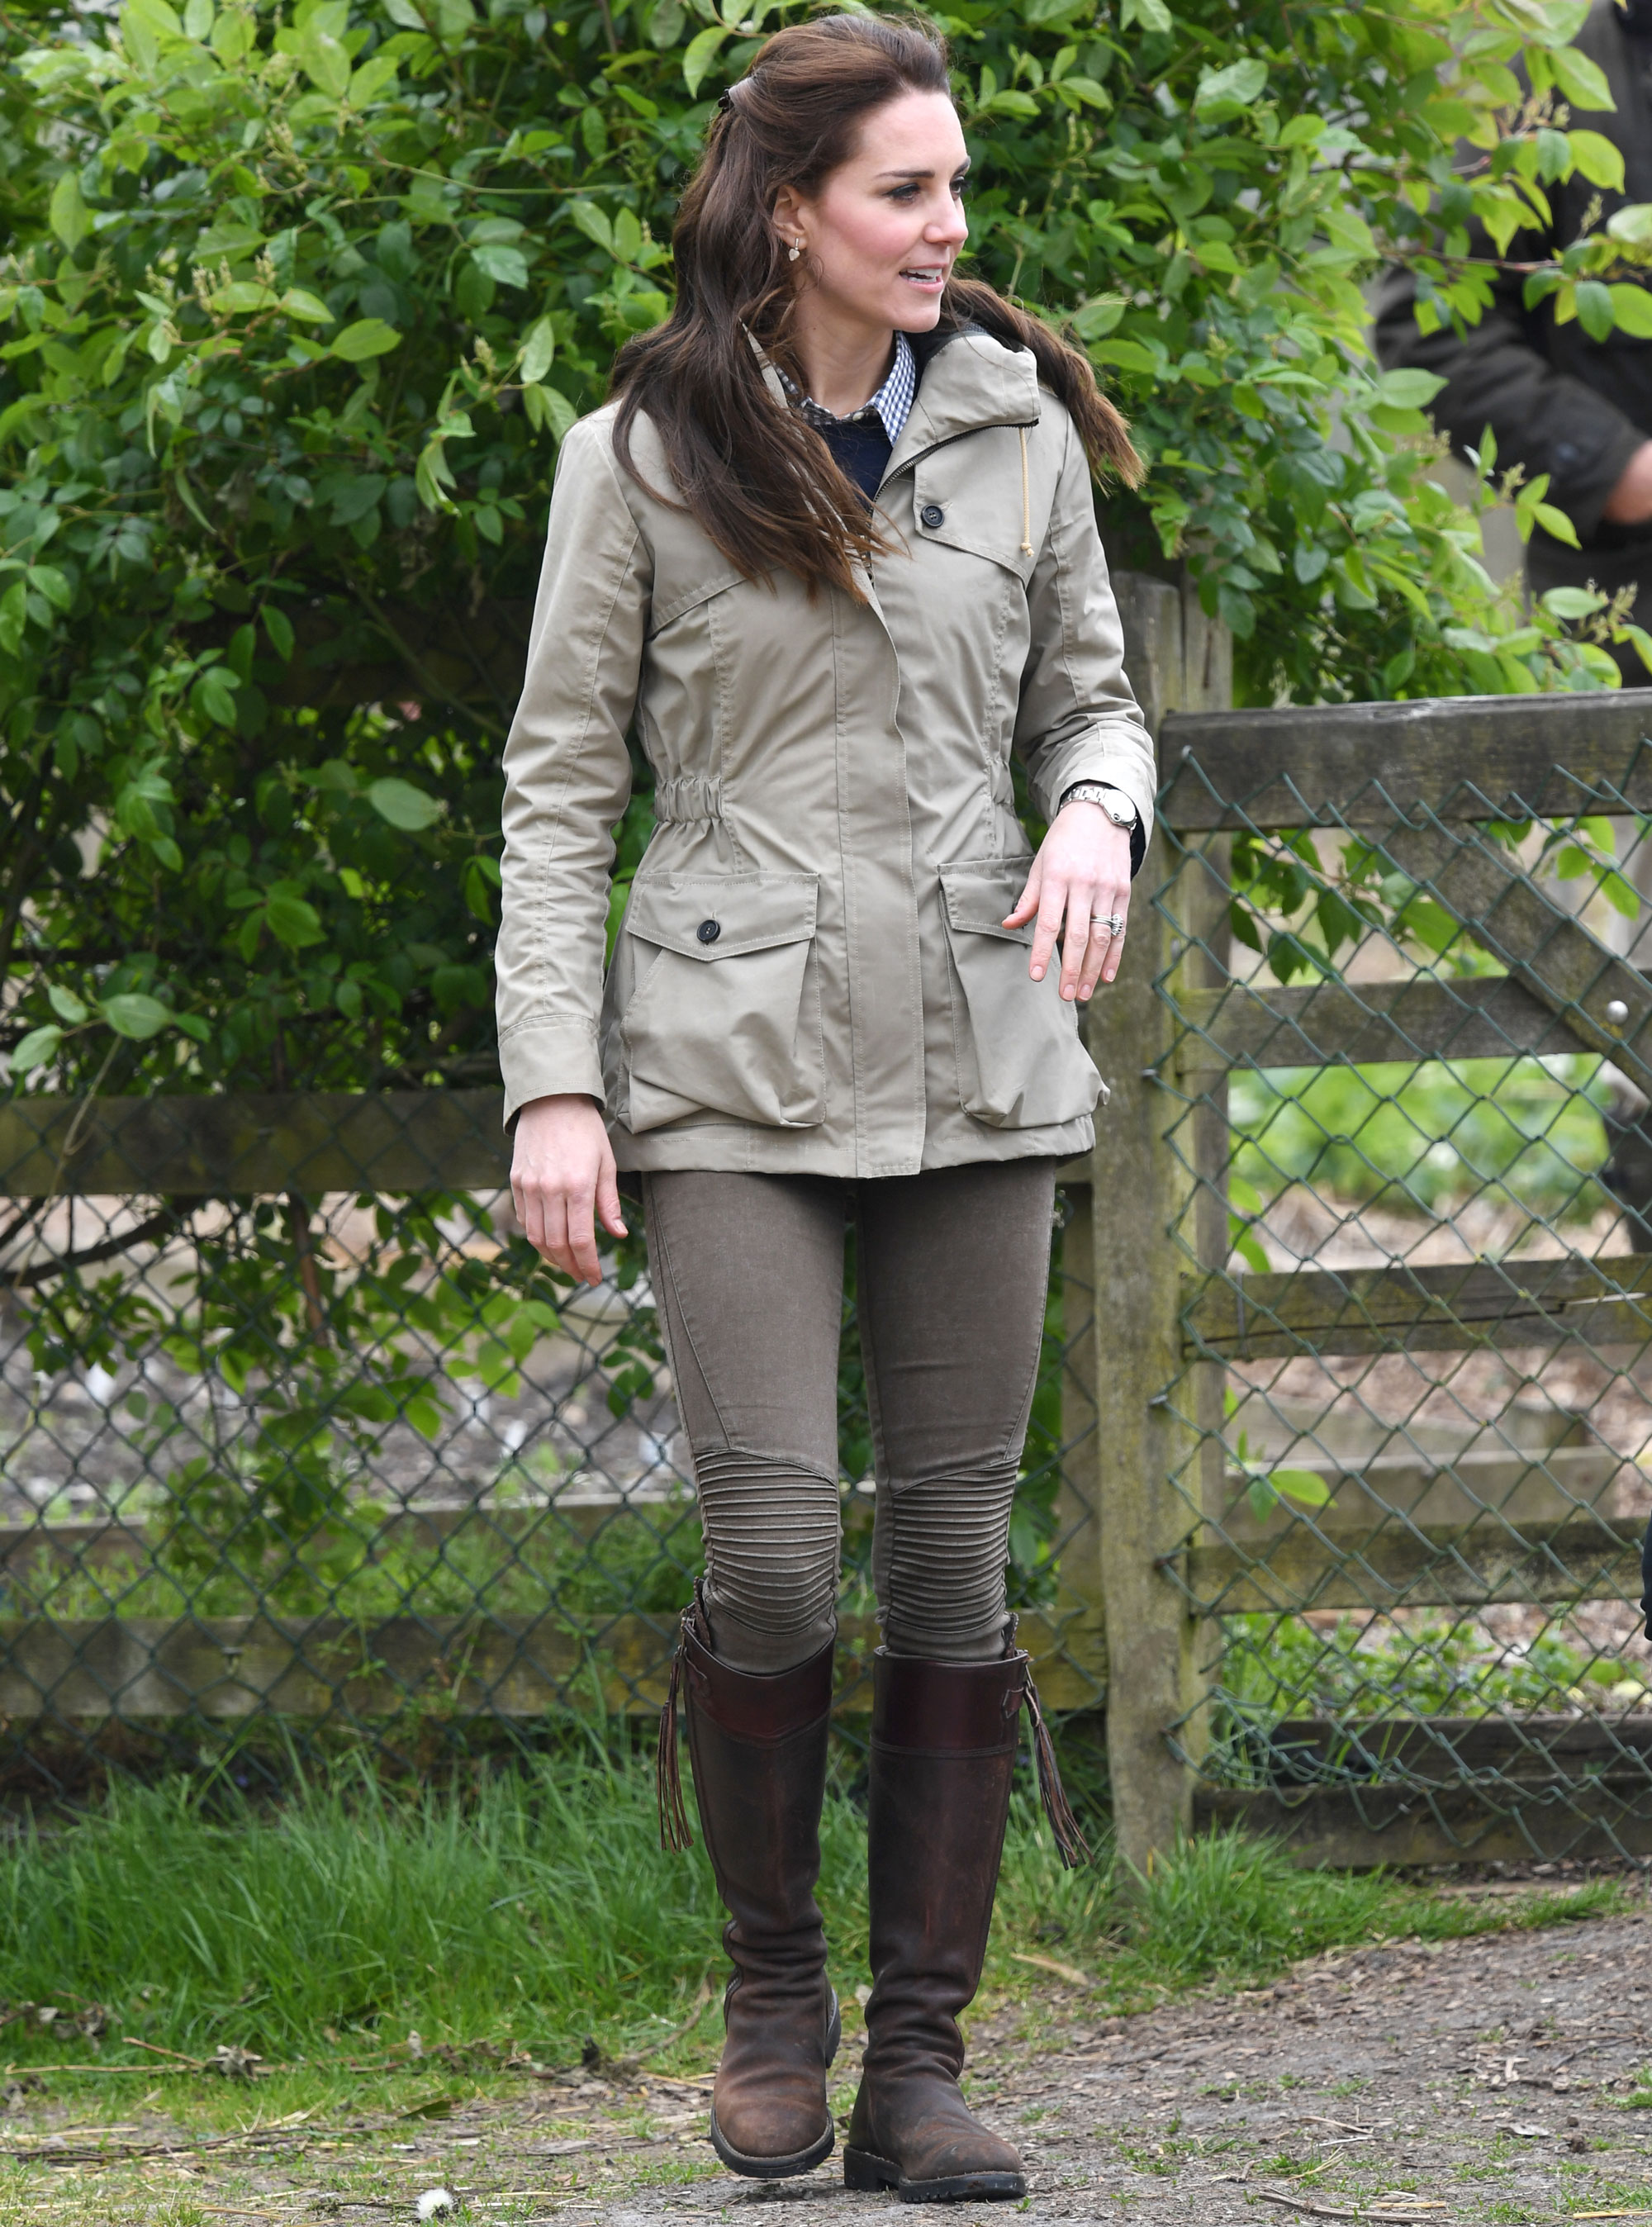 Duchess Of Cambridge Feeds Adorable Lamb On Farm Visit - Woman And Home